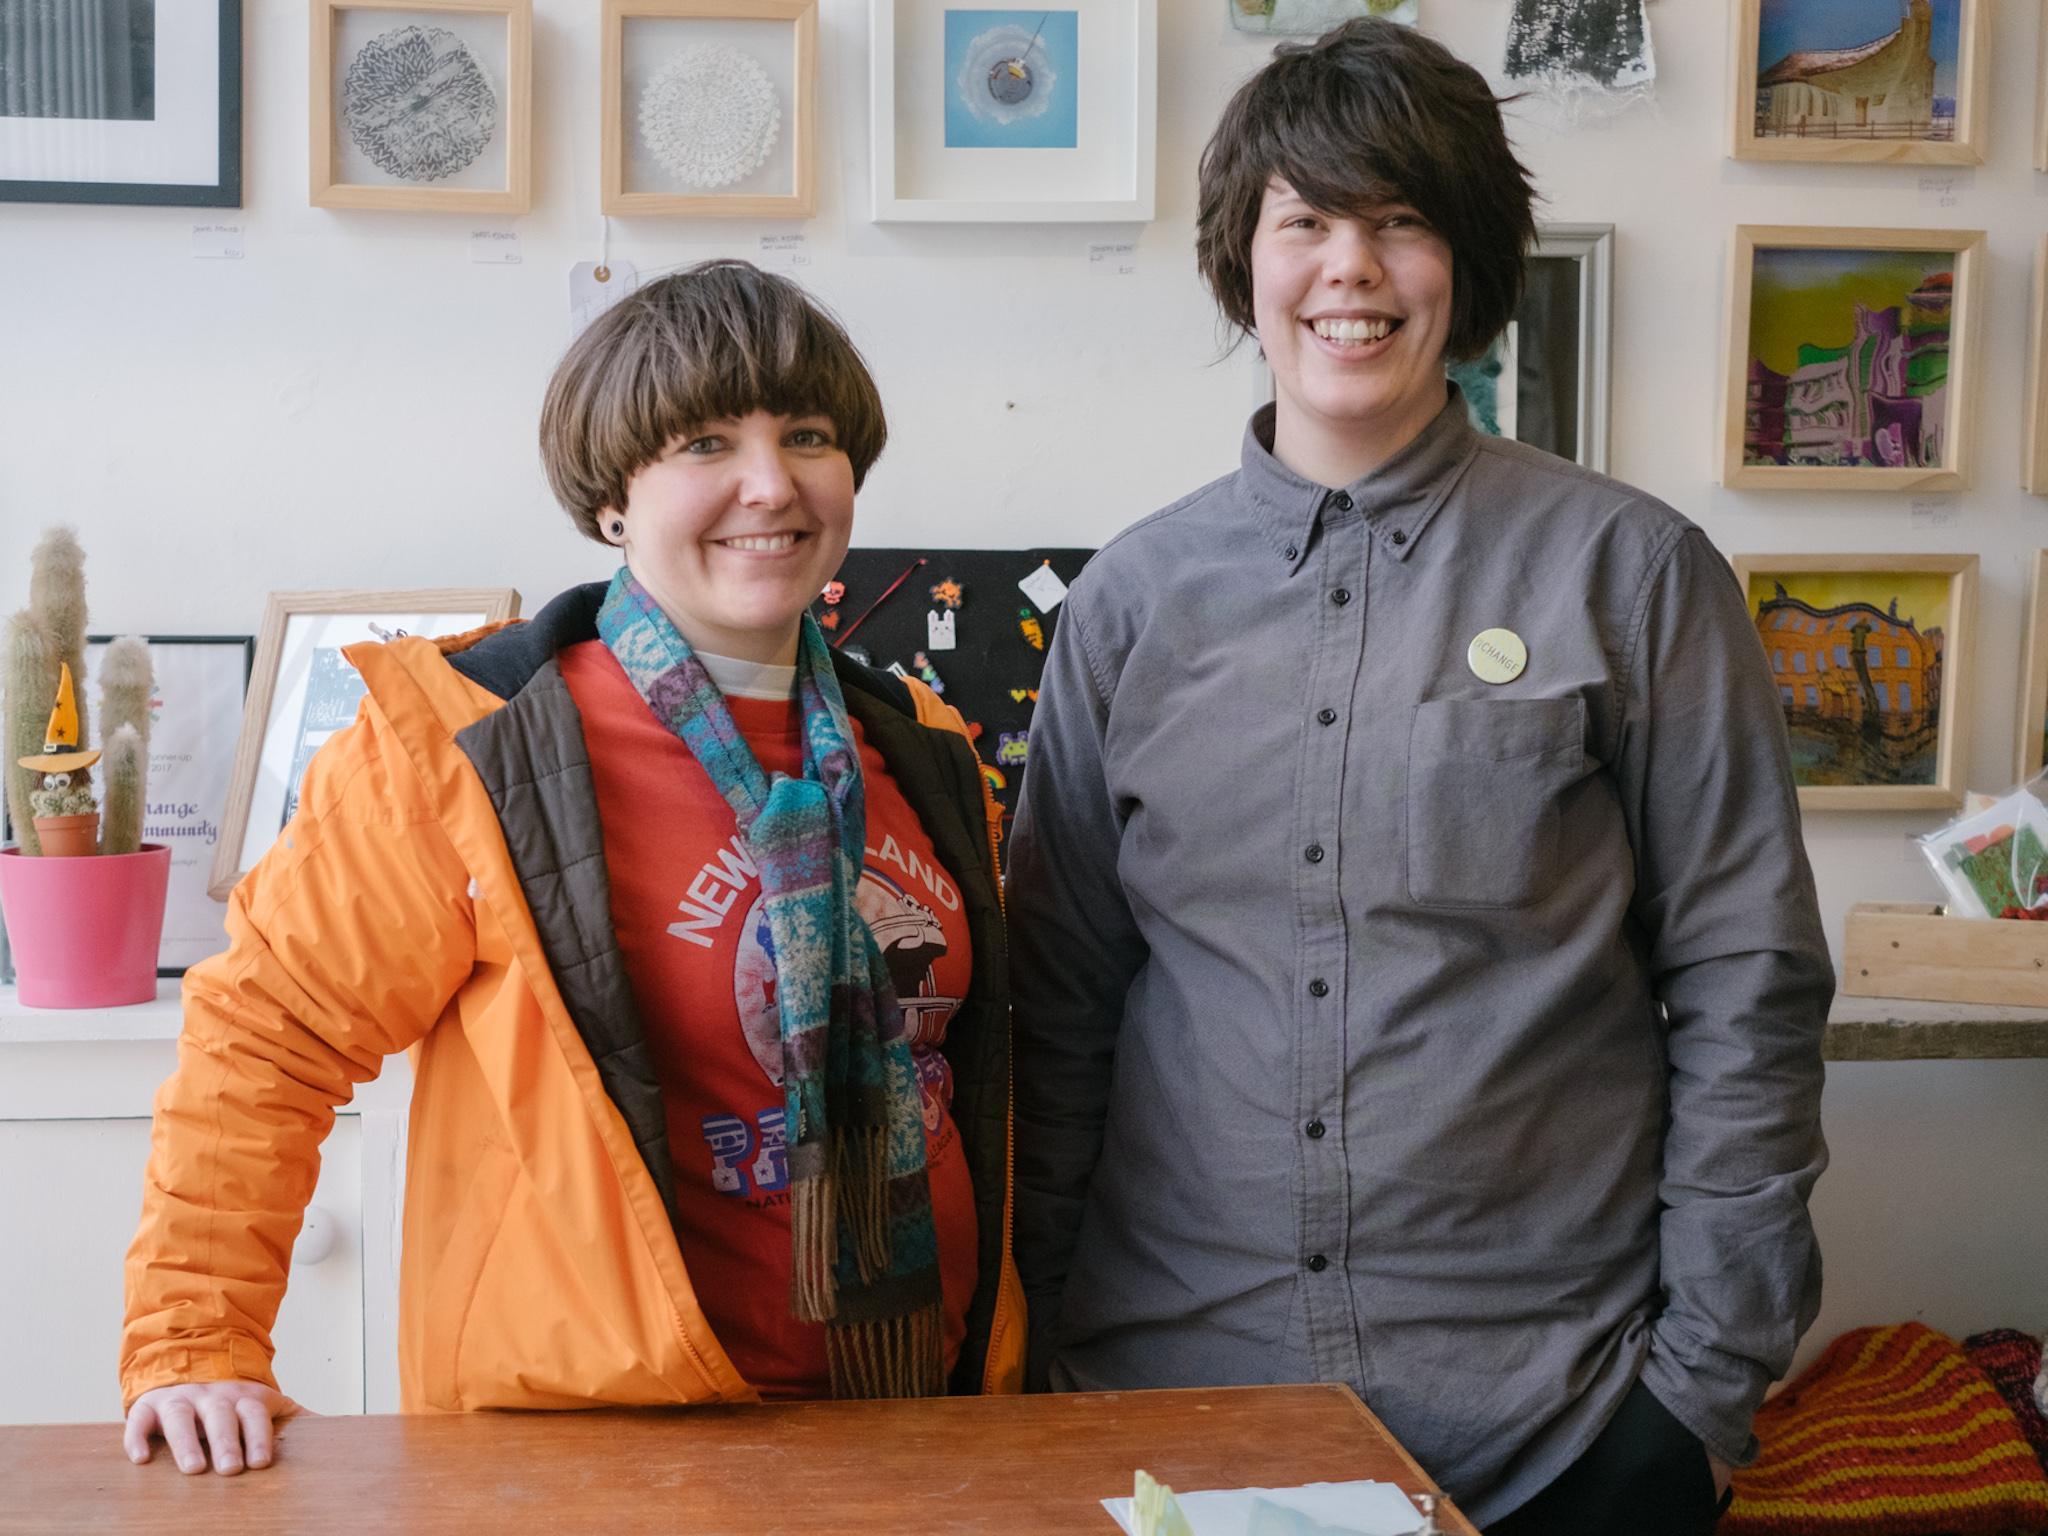 Beki Melrose and Jo Bambrough started the Exchange, an art gallery and shop in Morecambe's West End